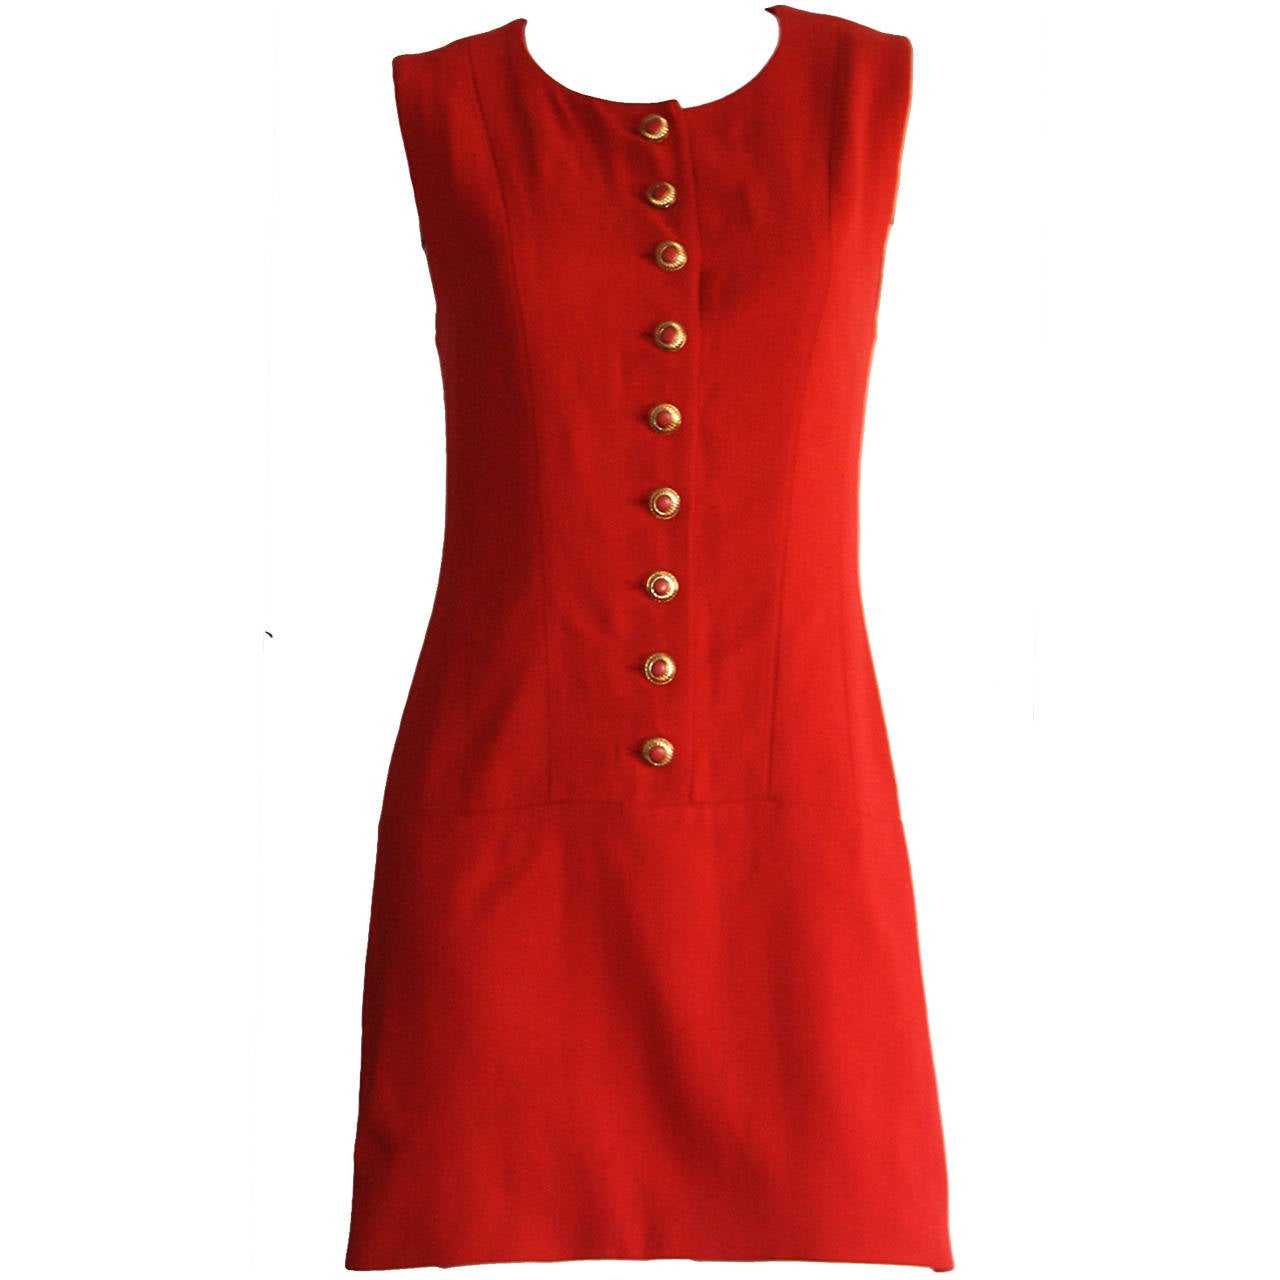 Vintage Karl Lagerfeld 1990s Does 1960s Red Scooter Dress